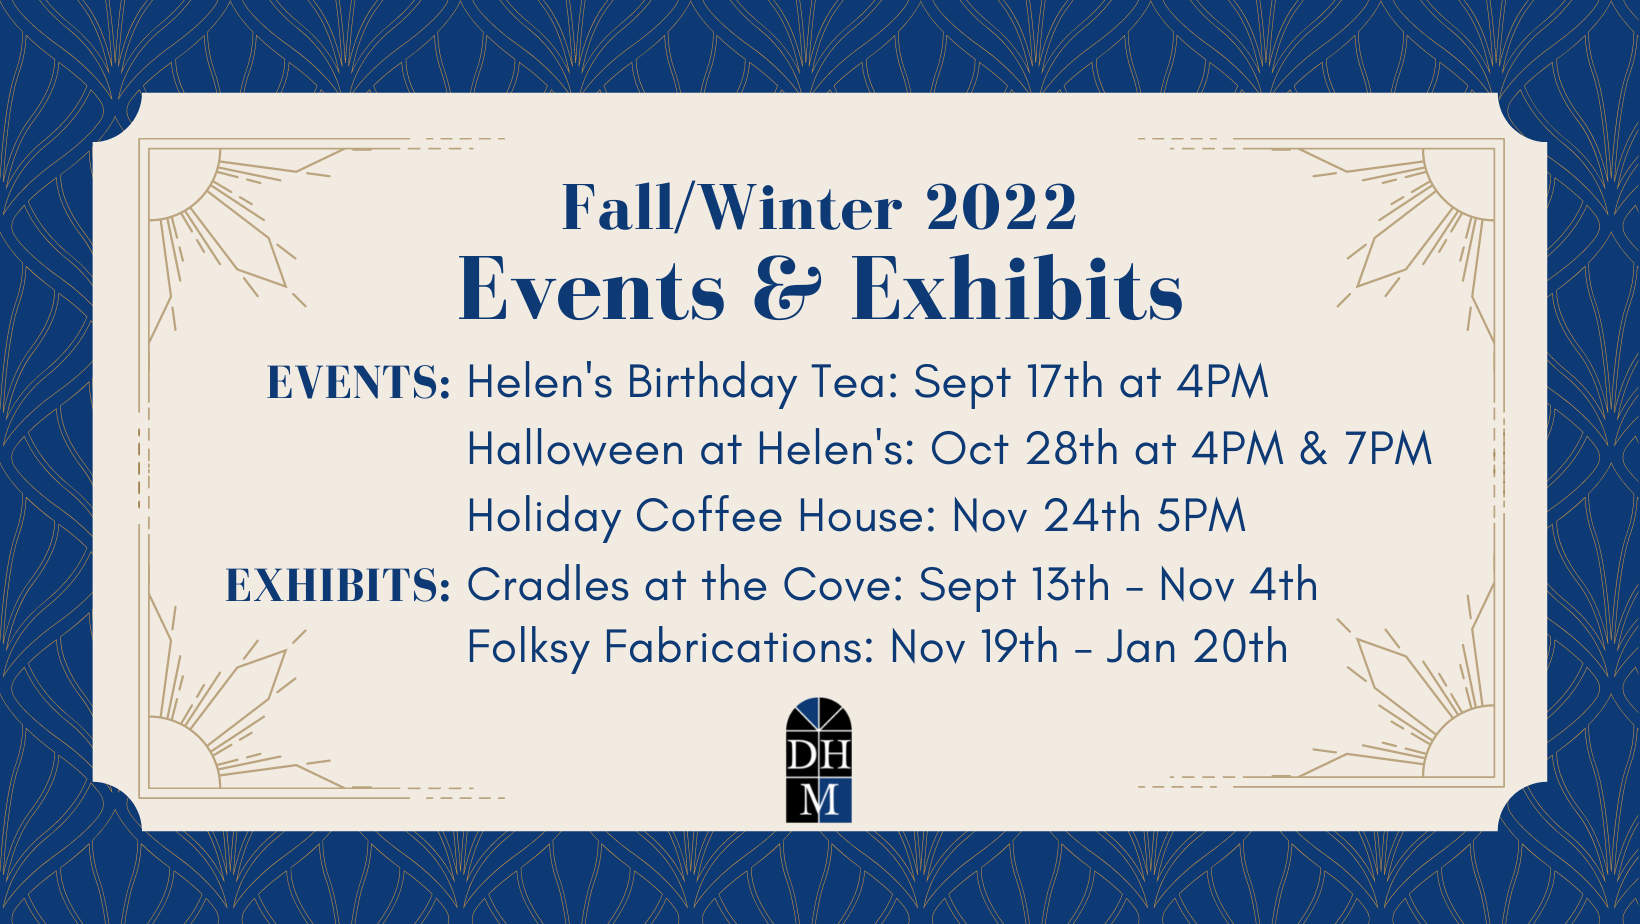 Fall/Winter events & exhibits